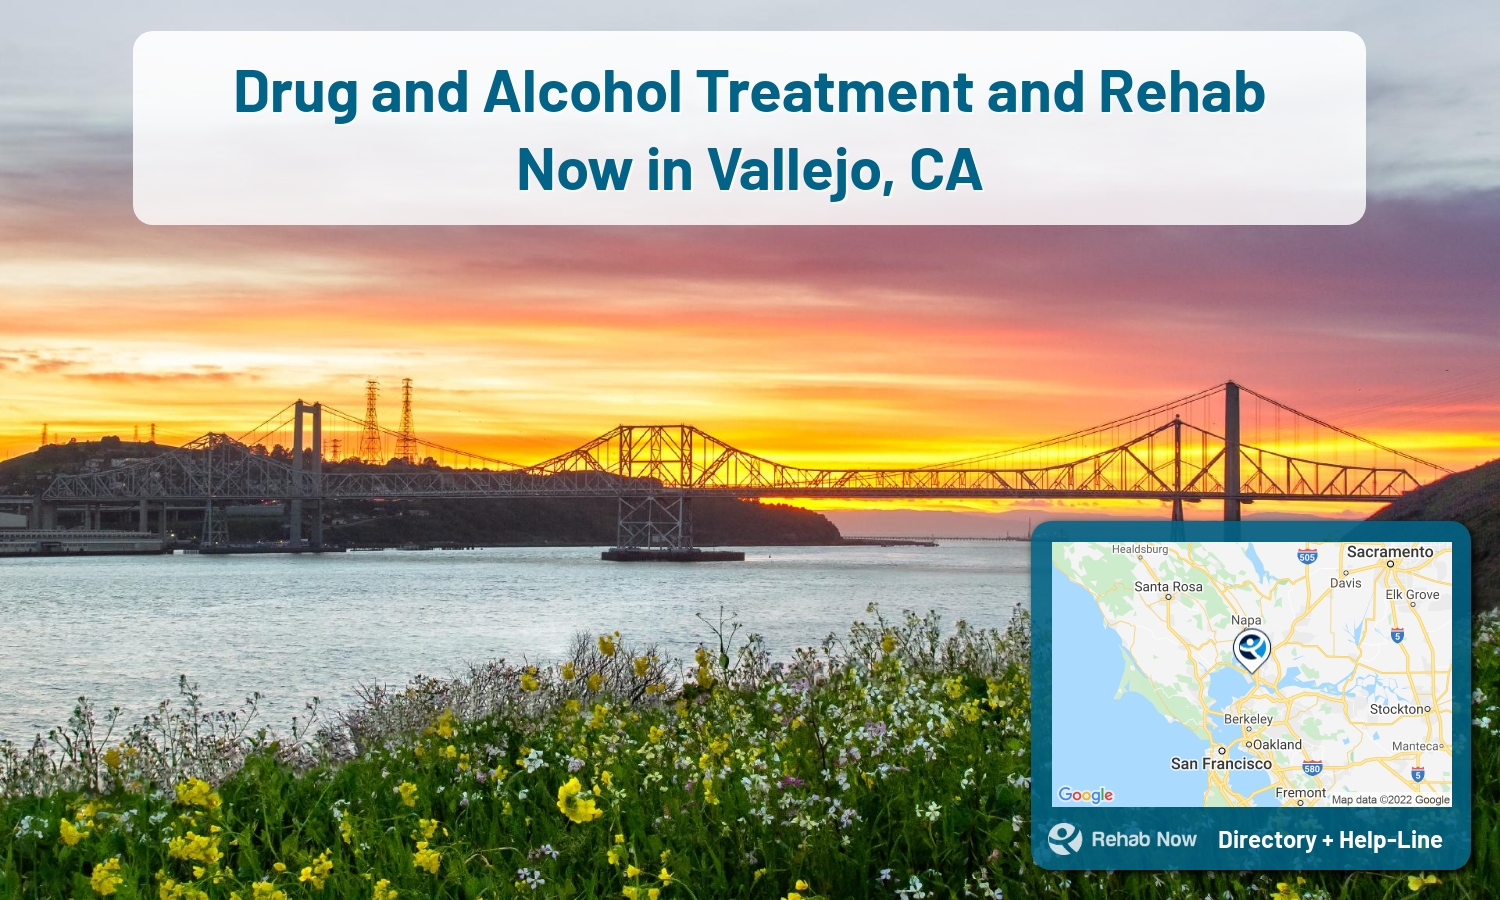 Vallejo, CA Treatment Centers. Find drug rehab in Vallejo, California, or detox and treatment programs. Get the right help now!